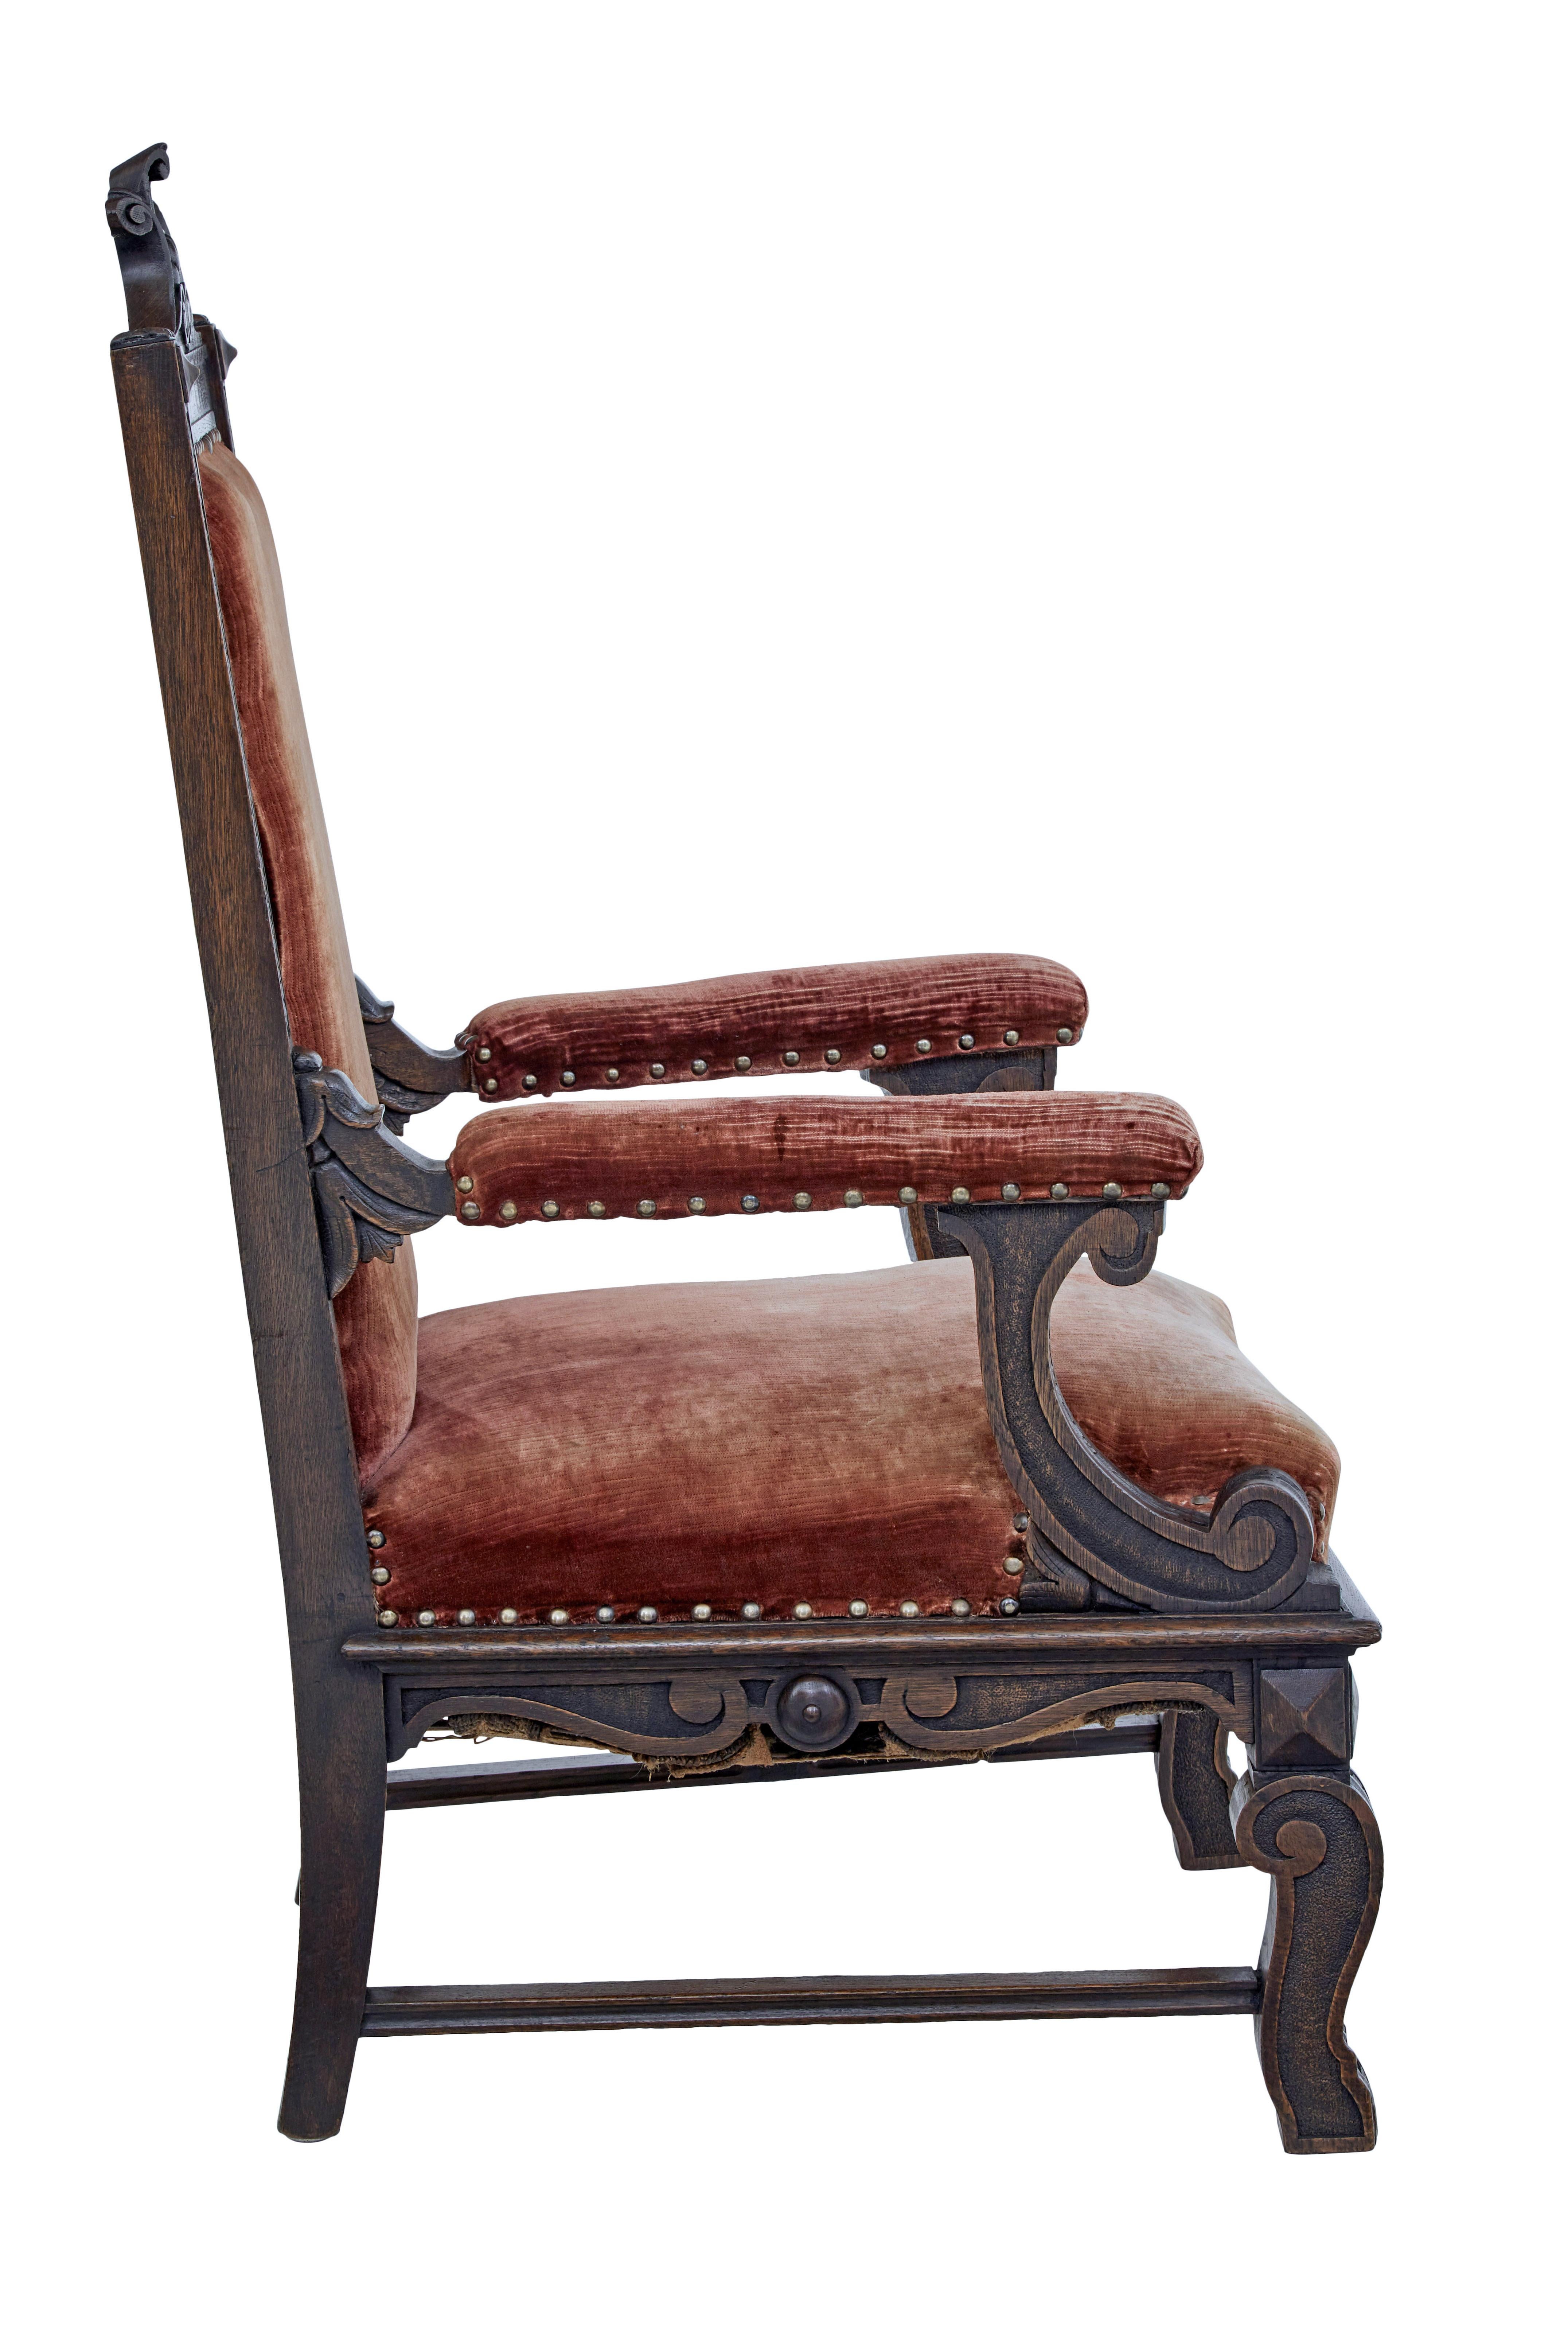 Gothic Revival 19th Century Victorian Carved Oak Throne Chair